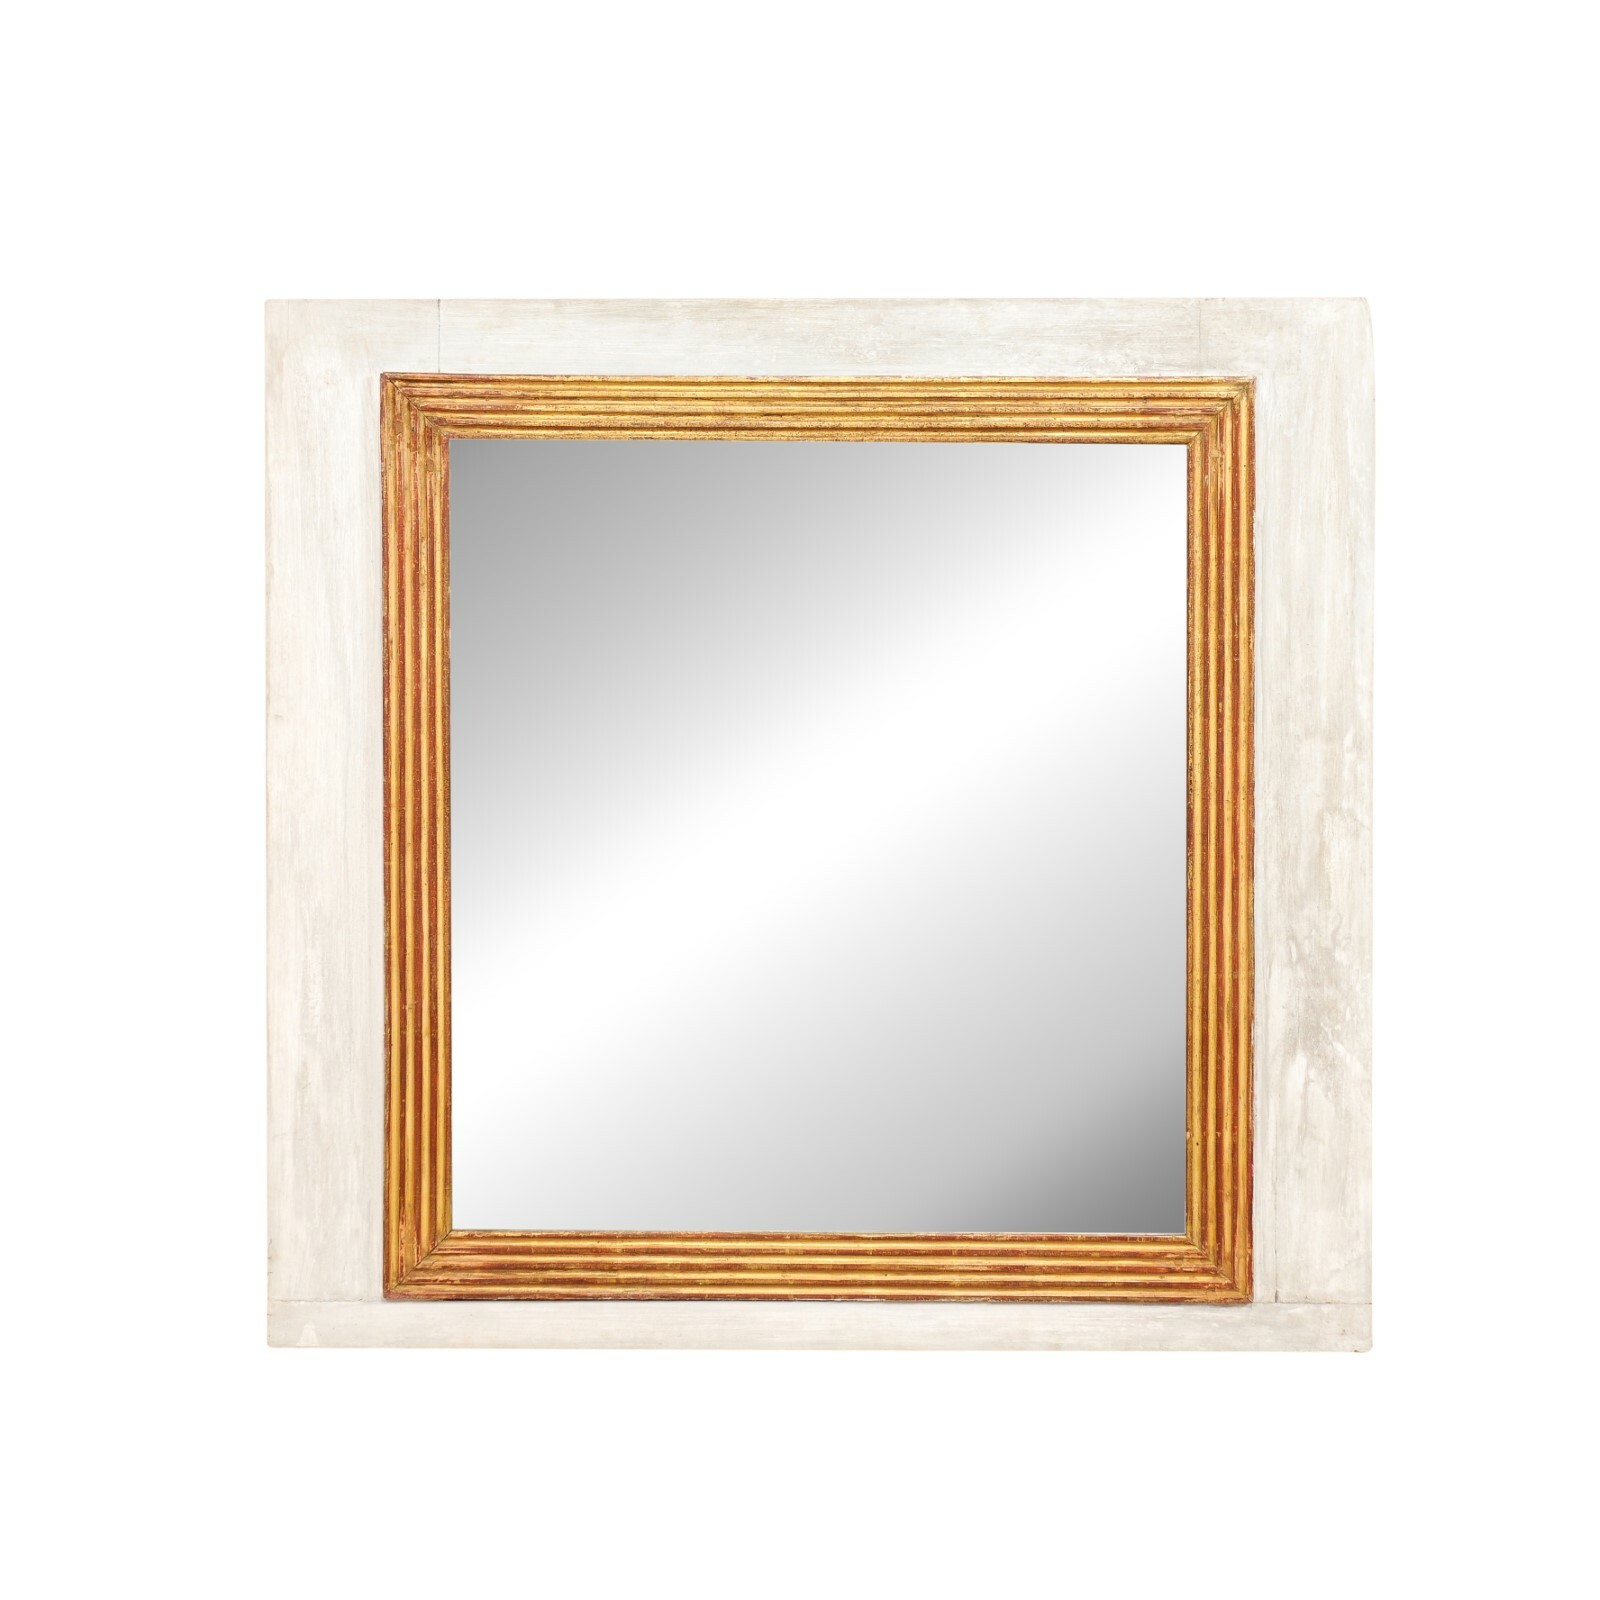 19th C. French Nearly-Square Mirror, 3.5Ft